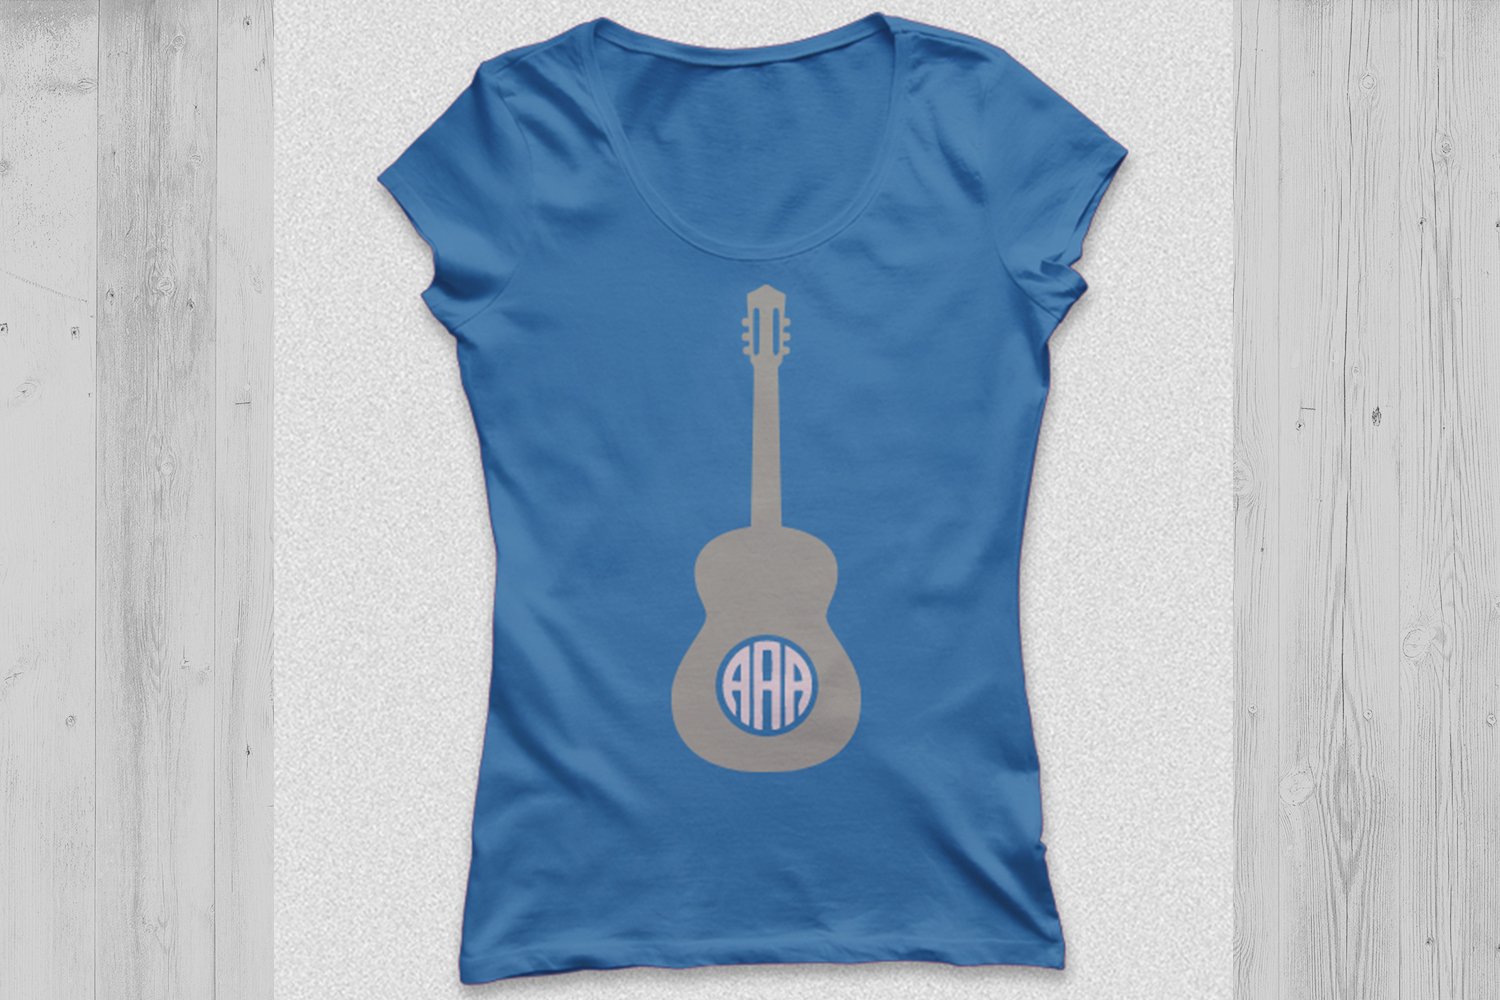 Women's t-shirt with a gray acoustic guitar print.